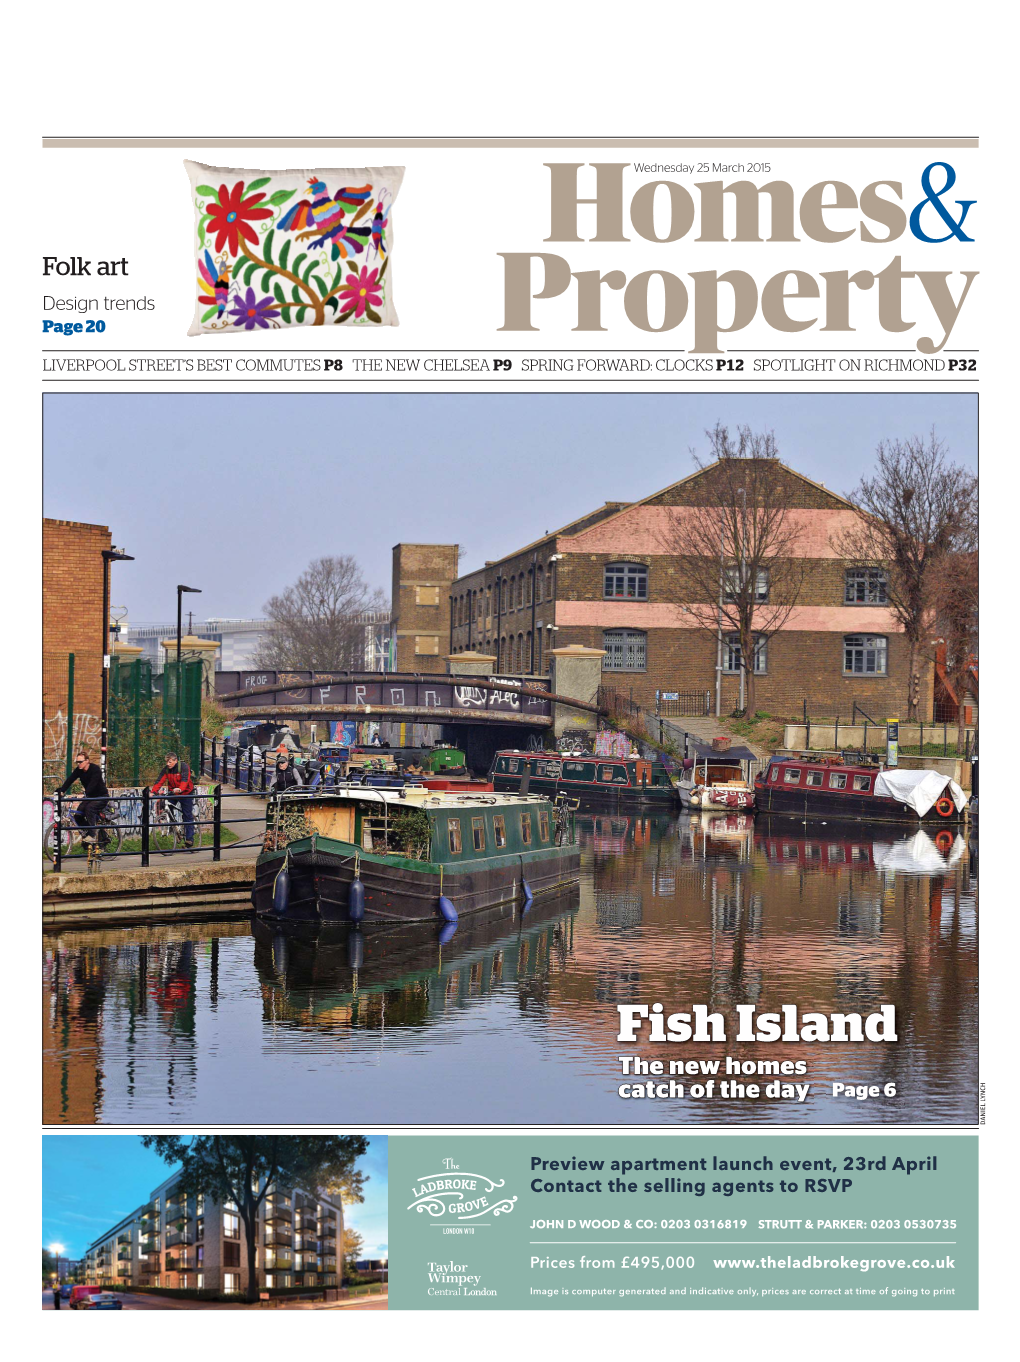 Fish Island the New Homes Catch of the Day Page 6 DANIEL LYNCH DANIEL